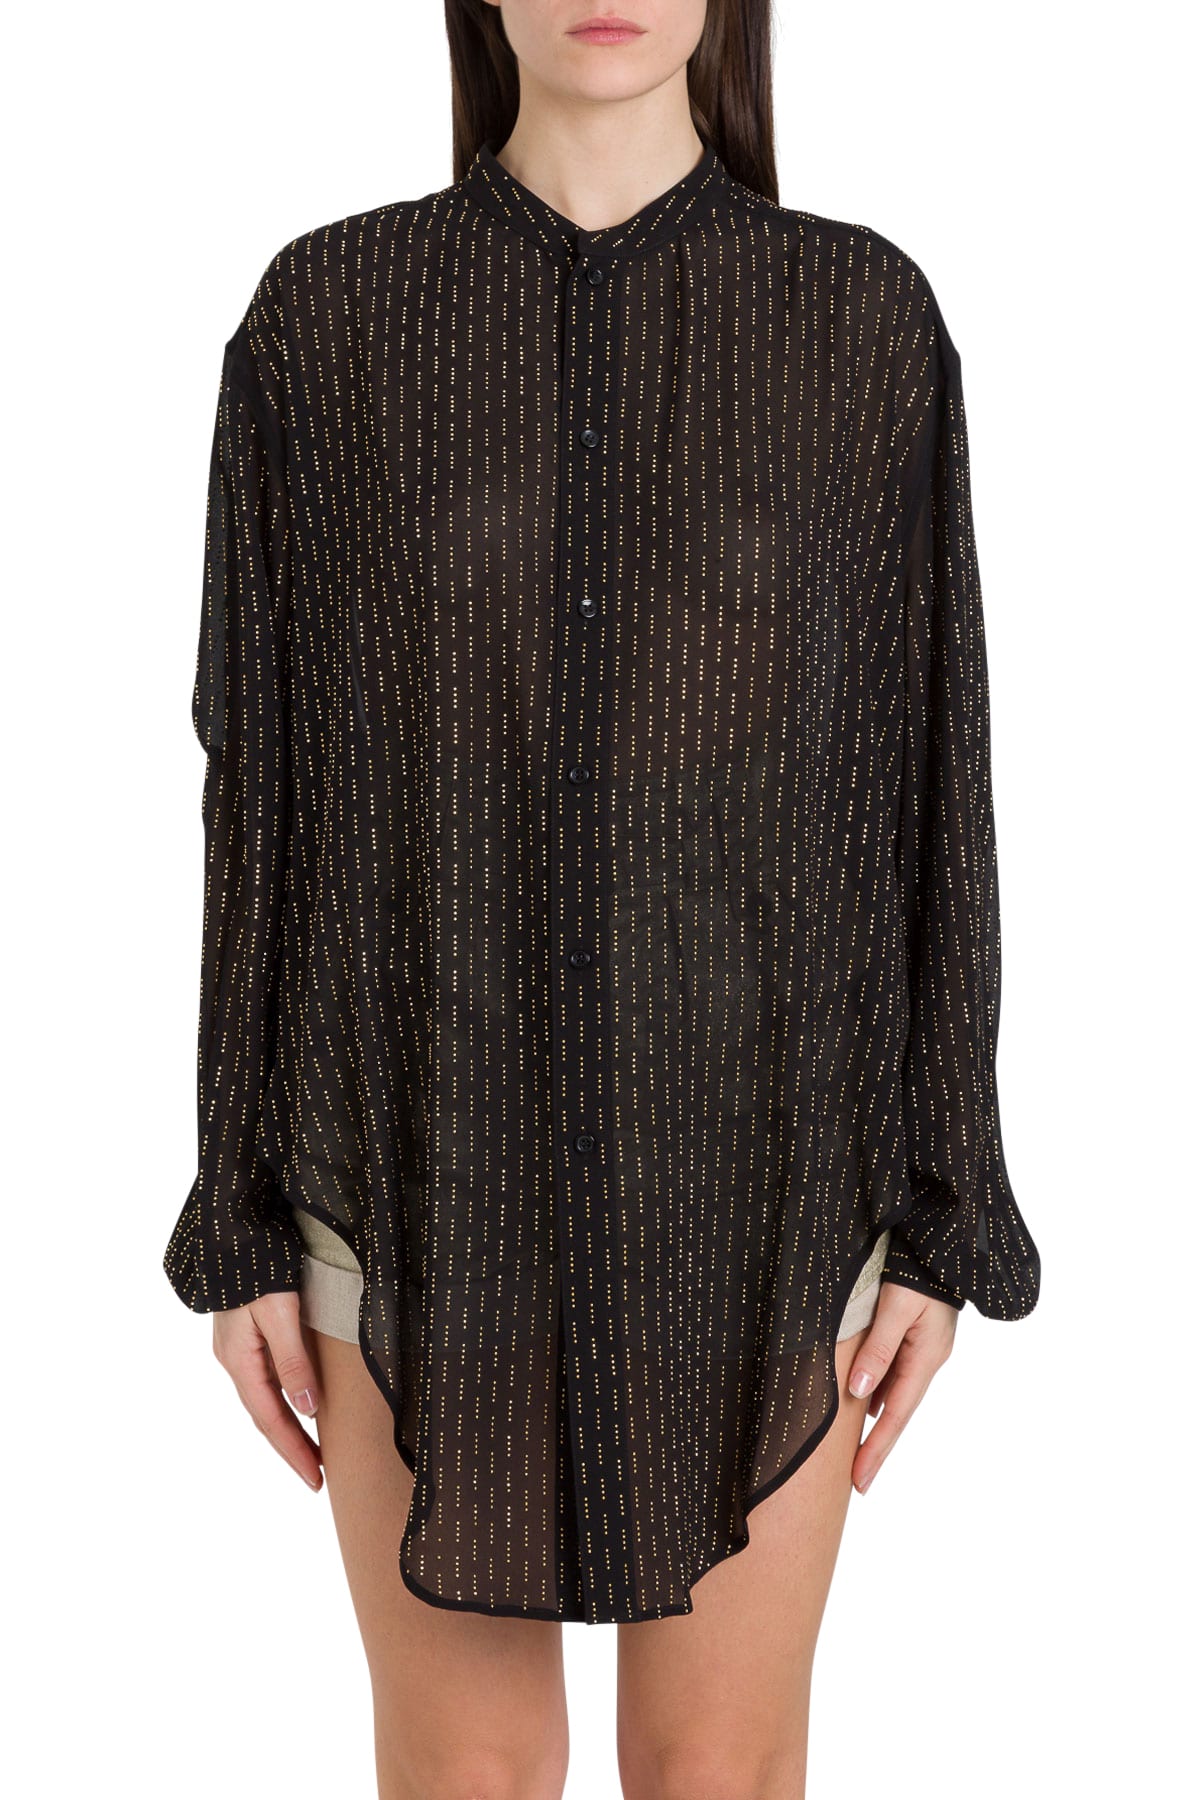 SAINT LAURENT WIDE SHIRT WITH KNOTTED DETAIL AND ALLOVER STUDS,11268458